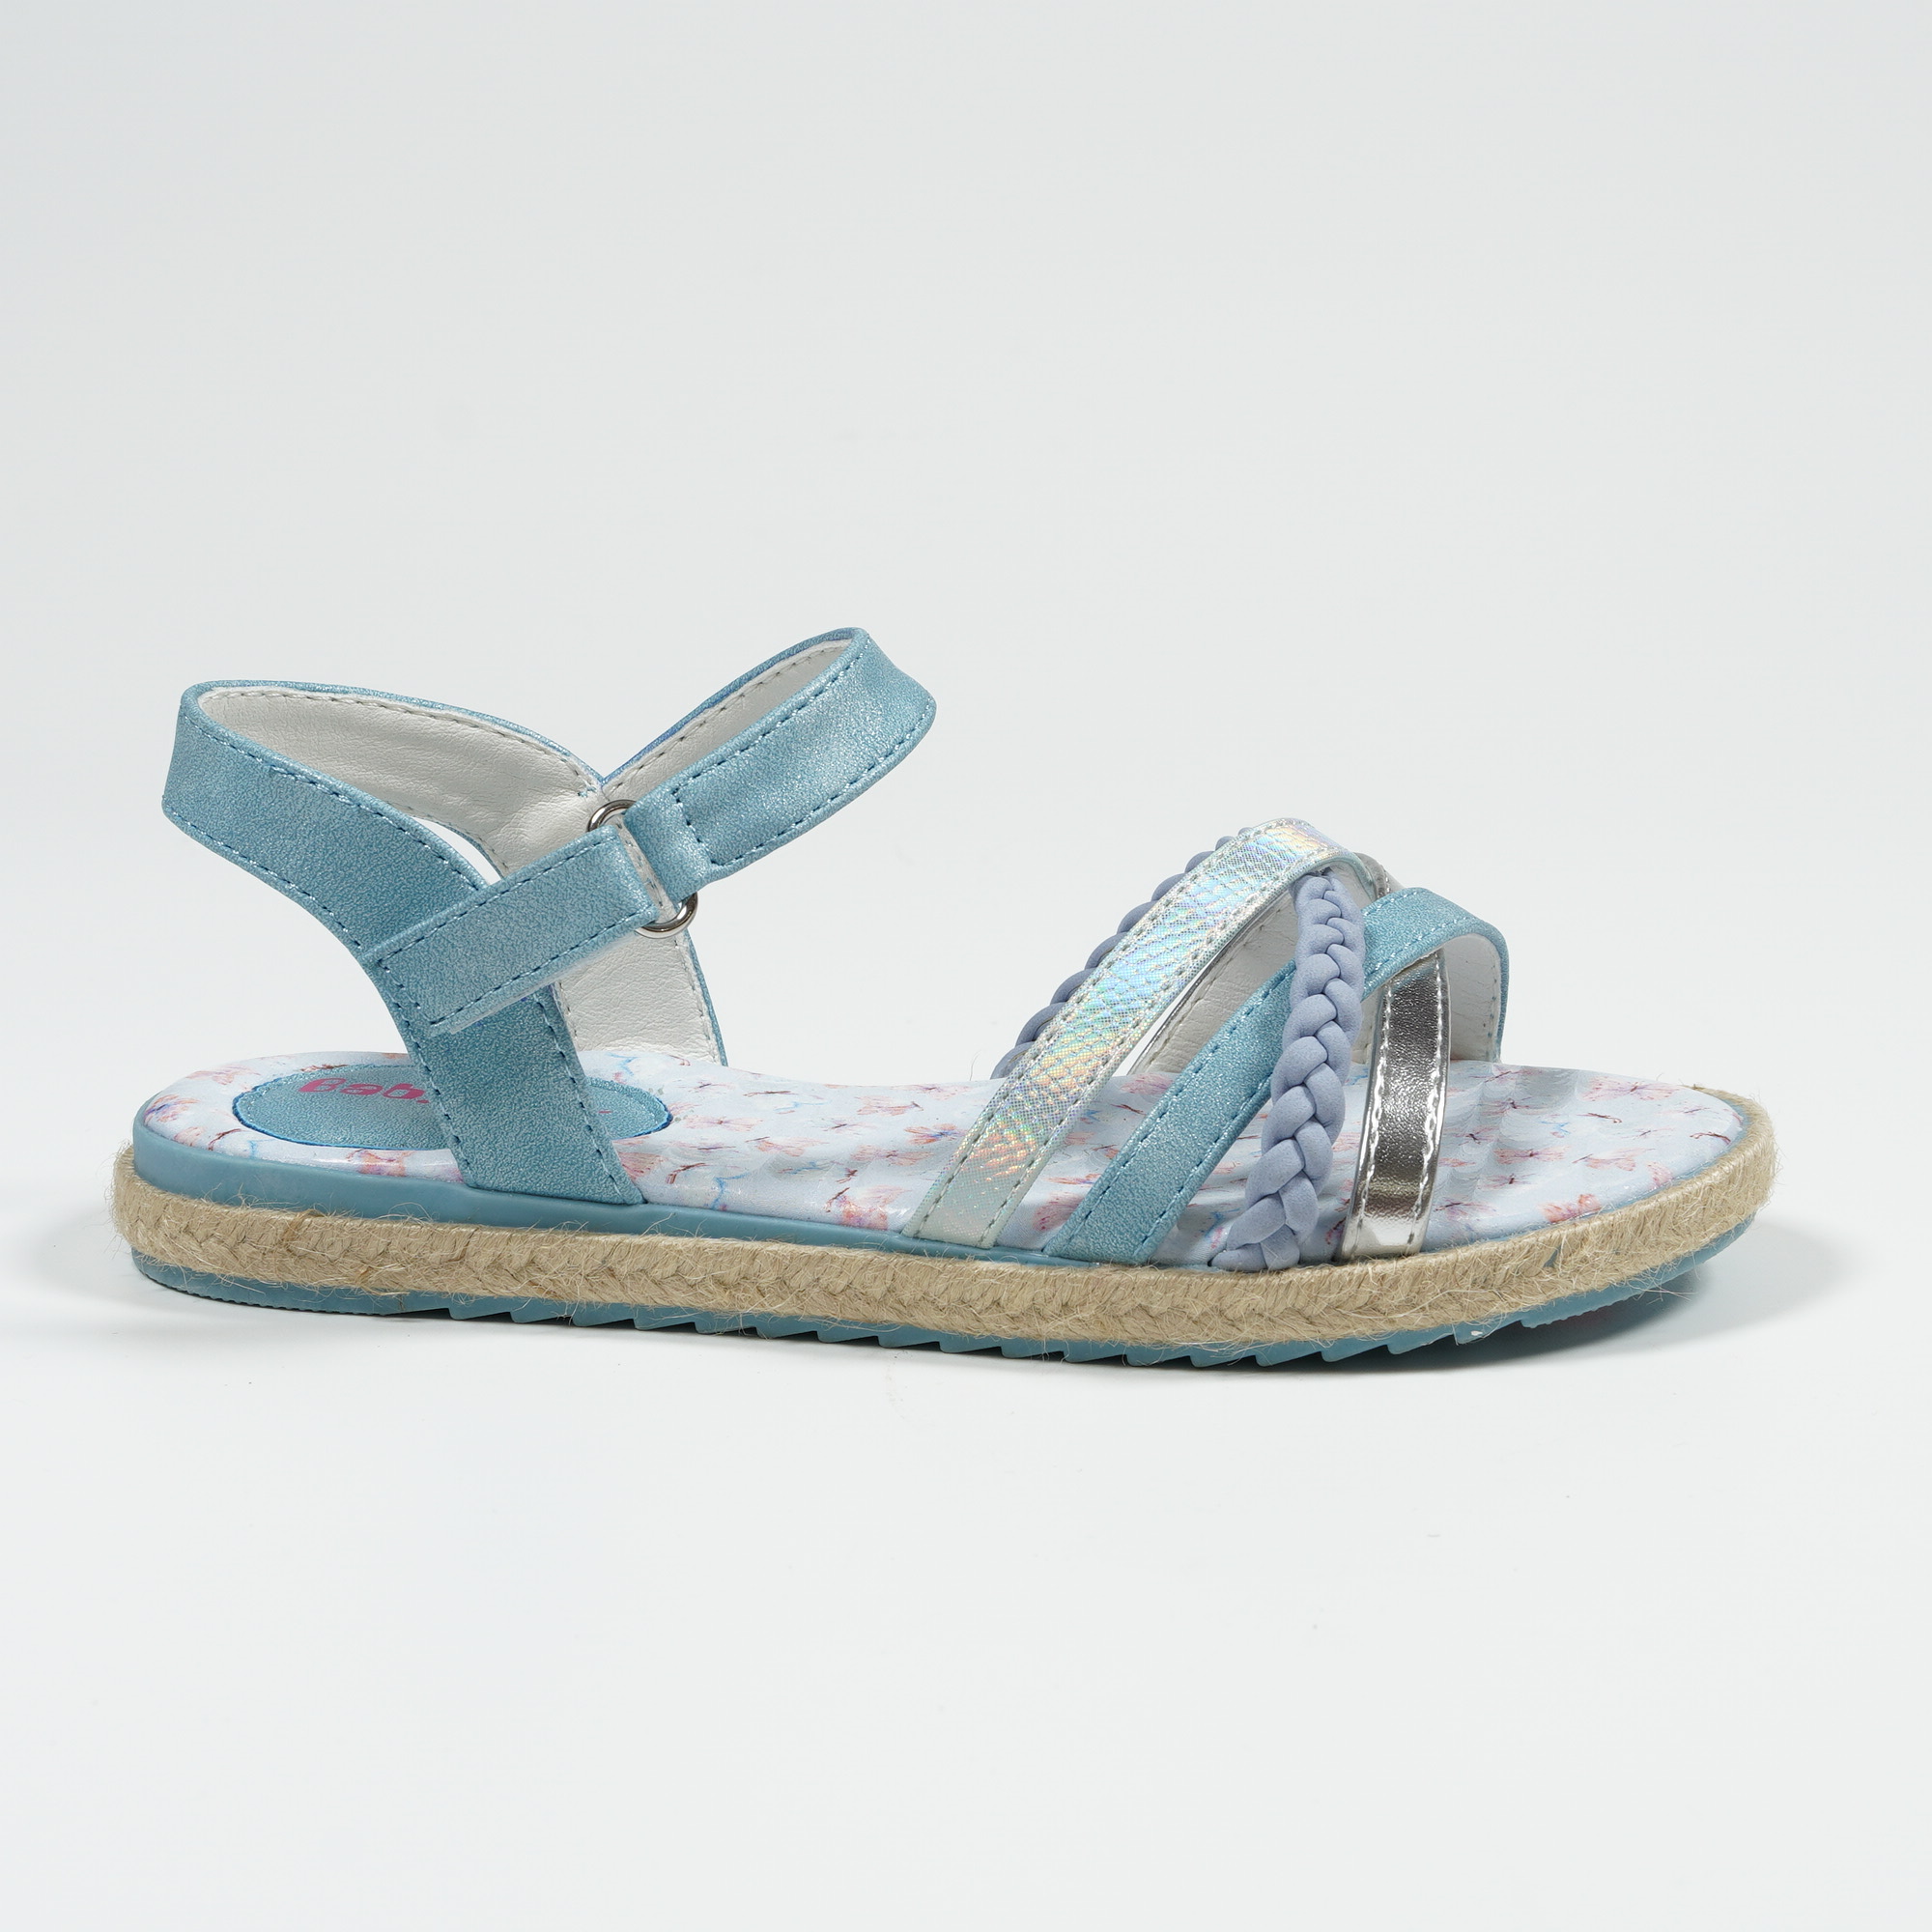 Stylish and Vibrant Girls' Summer Casual Sandals: Embrace the Season in Style!